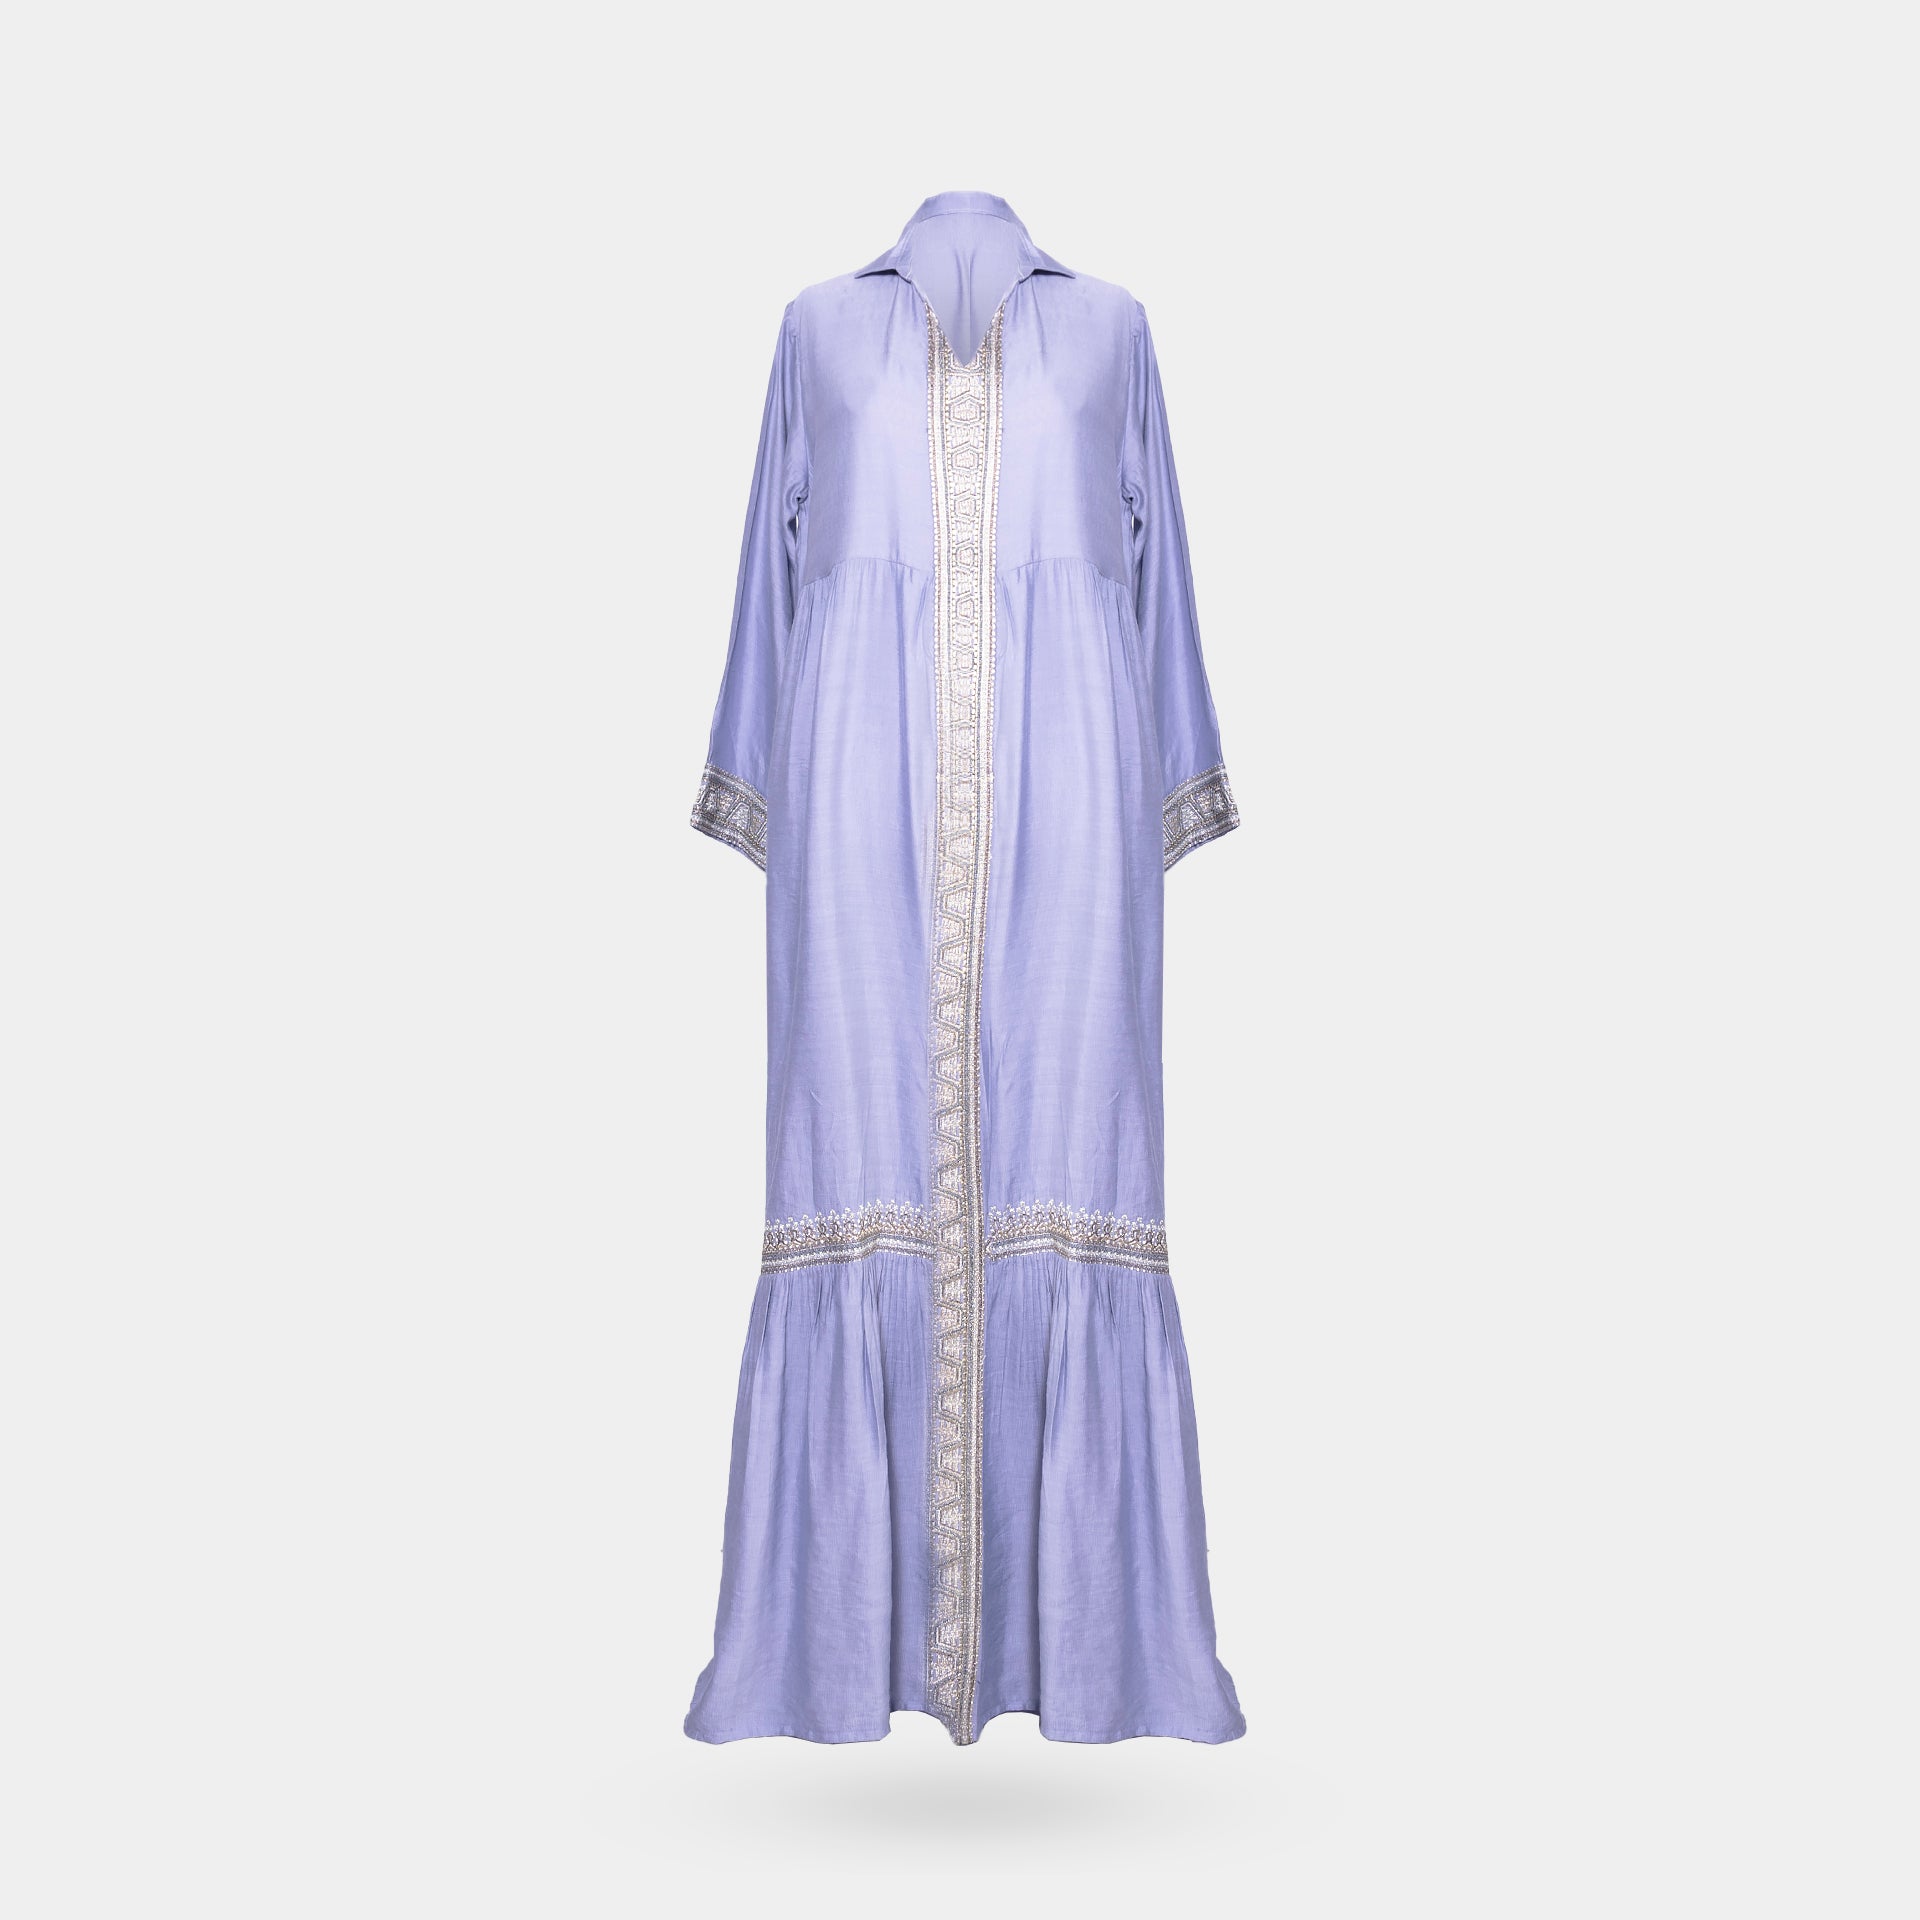 Purple Embroidery Abaya with a Collar From Darzah